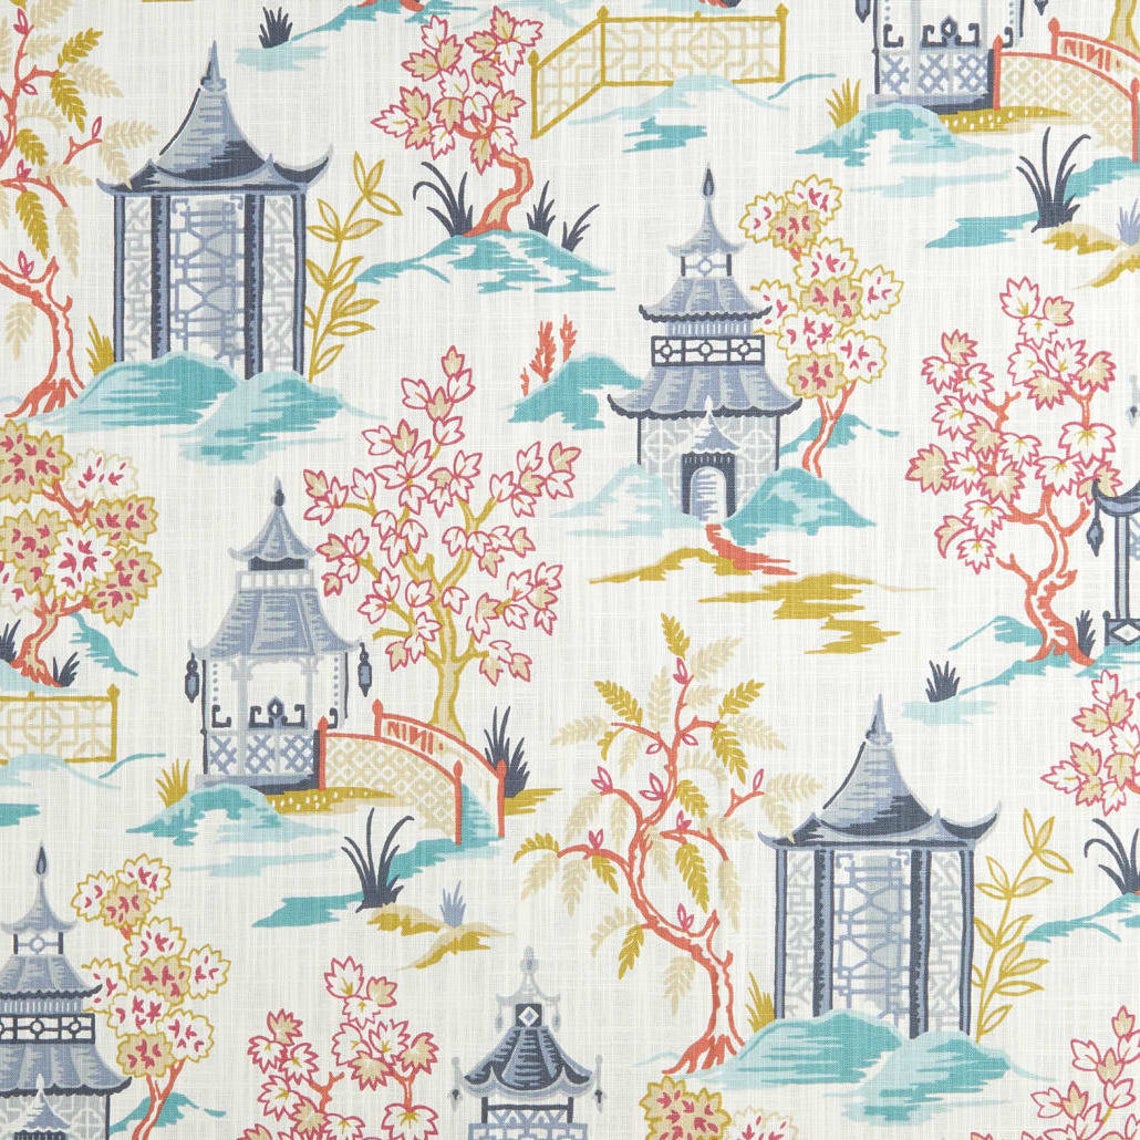 tailored bedskirt in shoji summer oriental toile, multicolor chinoiserie